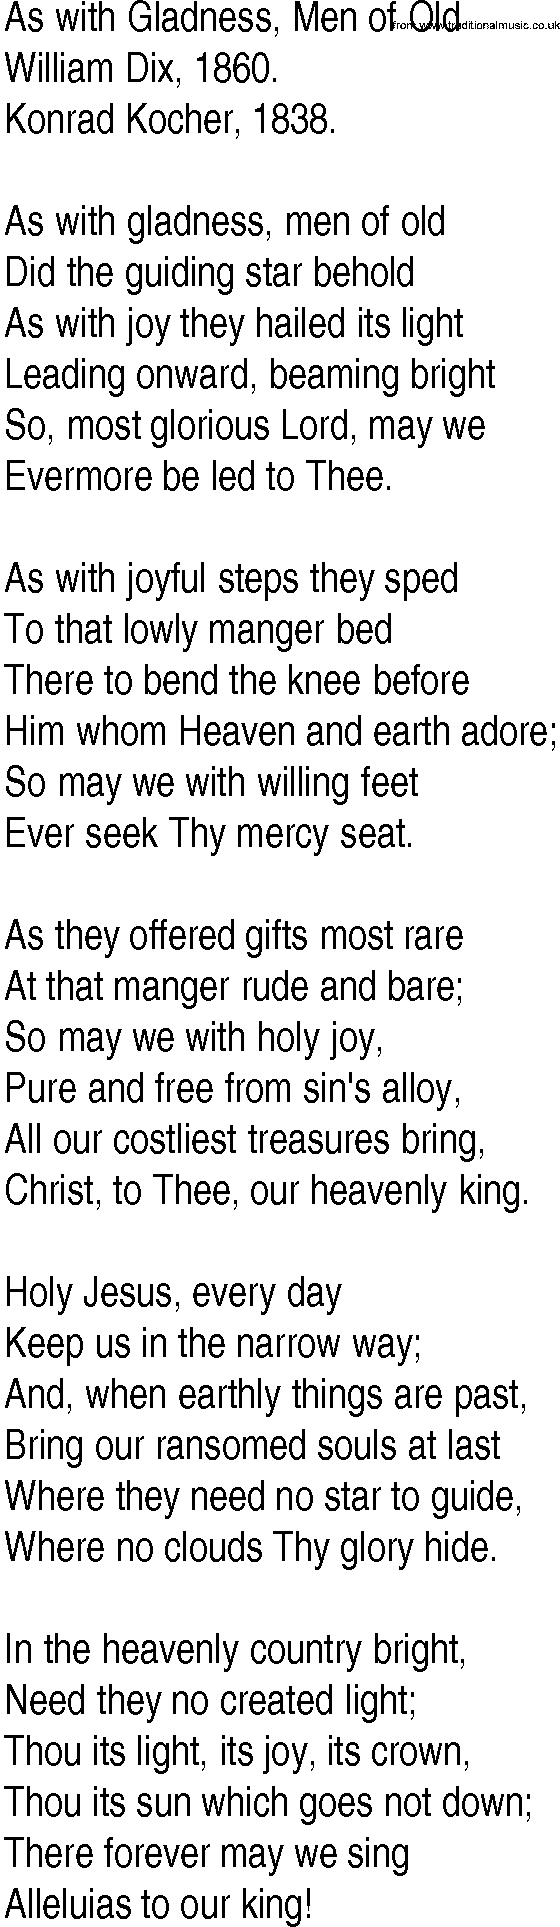 Hymn and Gospel Song: As with Gladness, Men of Old by William Dix lyrics